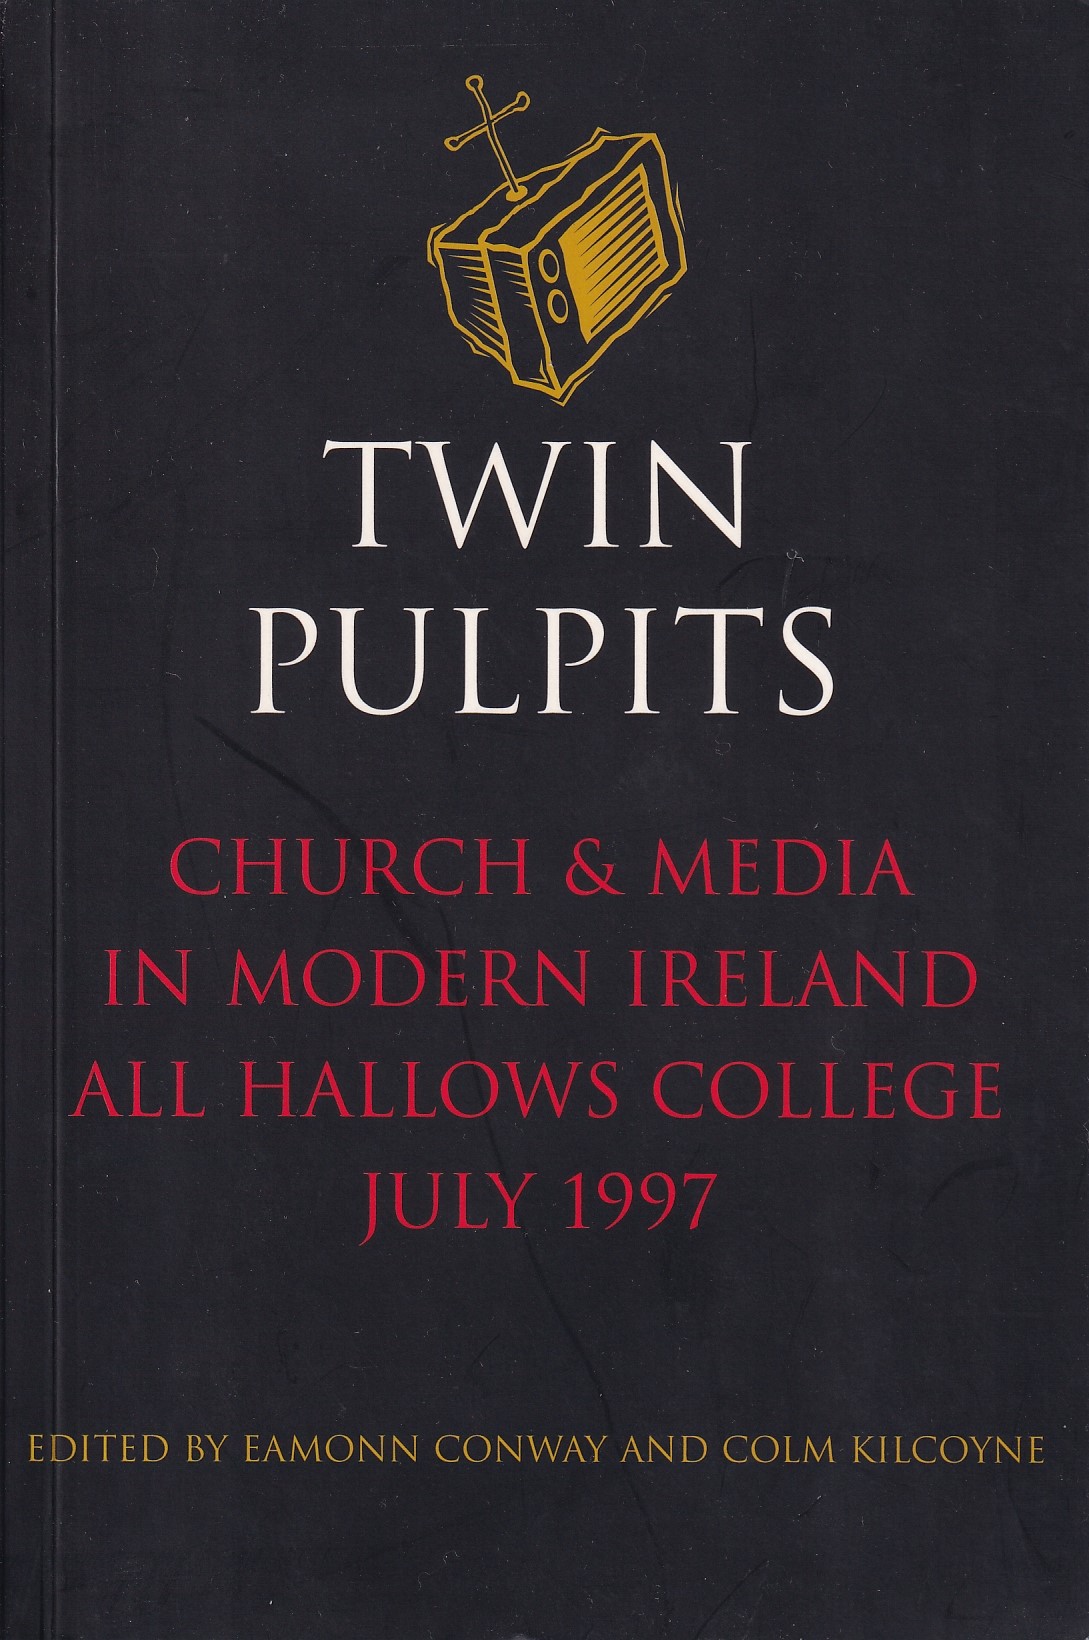 Twin Pulpits: Church and Media in Modern Ireland, All Hallows College, July 1997 | Eamonn Conway & Colm Kilcoyne (eds.) | Charlie Byrne's